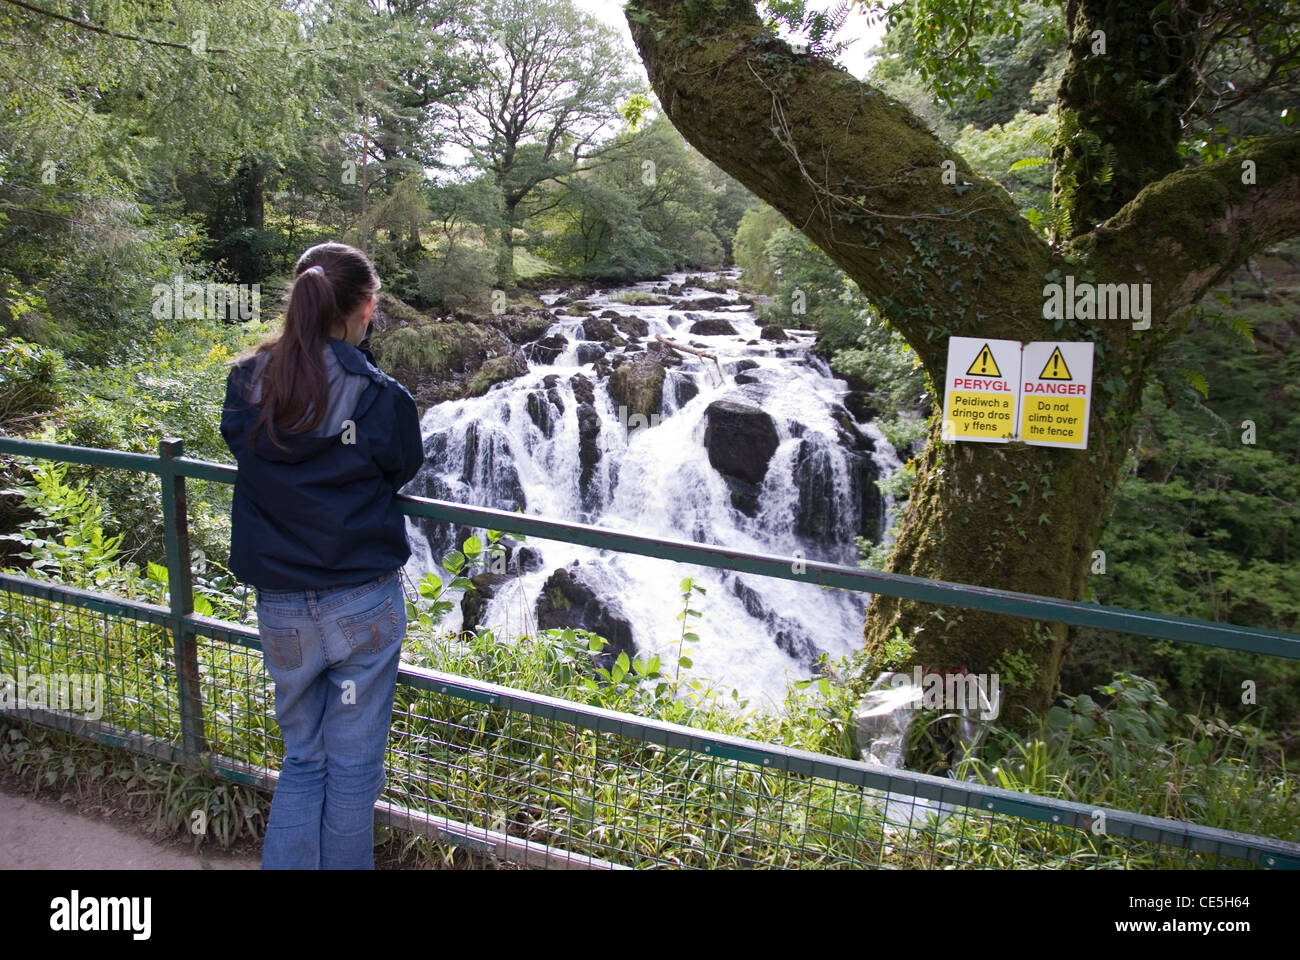 Girl Standing Beside Do Not Climb Over the Fence Sign at Swallow Falls, Snowdonia, Betws y Coed, Gwynedd, North Wales, UK Stock Photo